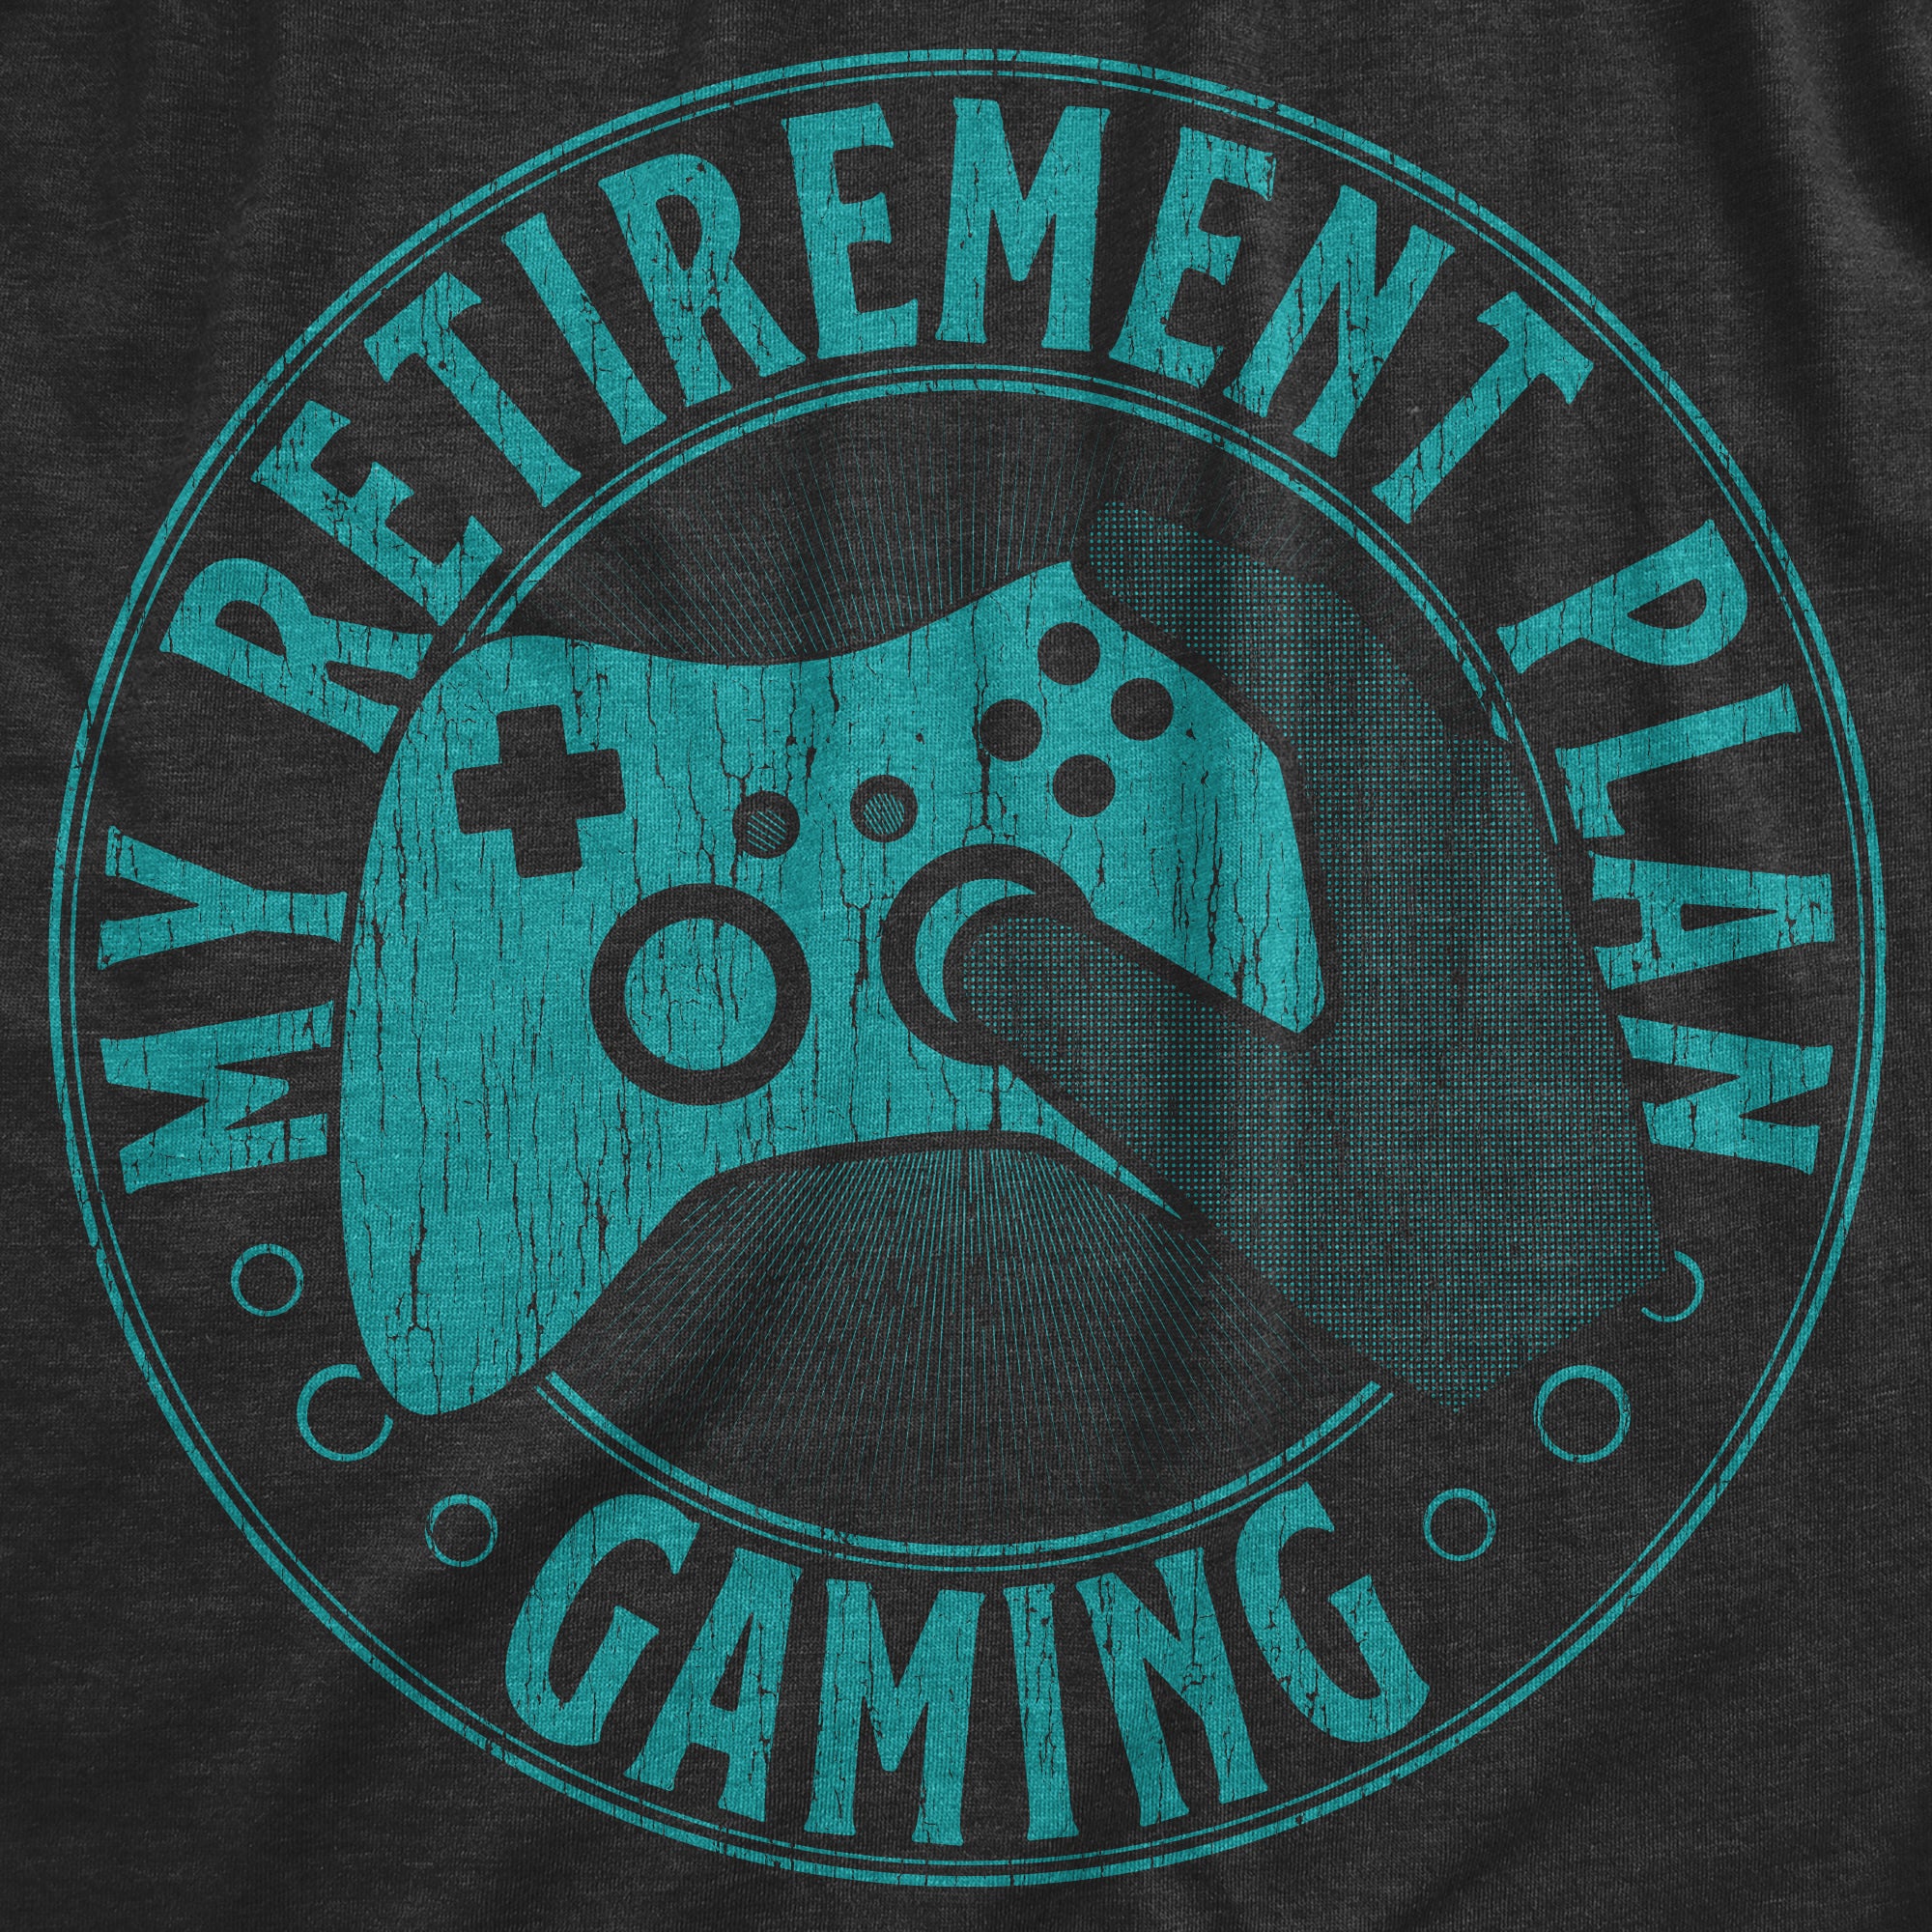 Funny Heather Black - GAMING My Retirement Plan Gaming Womens T Shirt Nerdy Office Video Games Tee